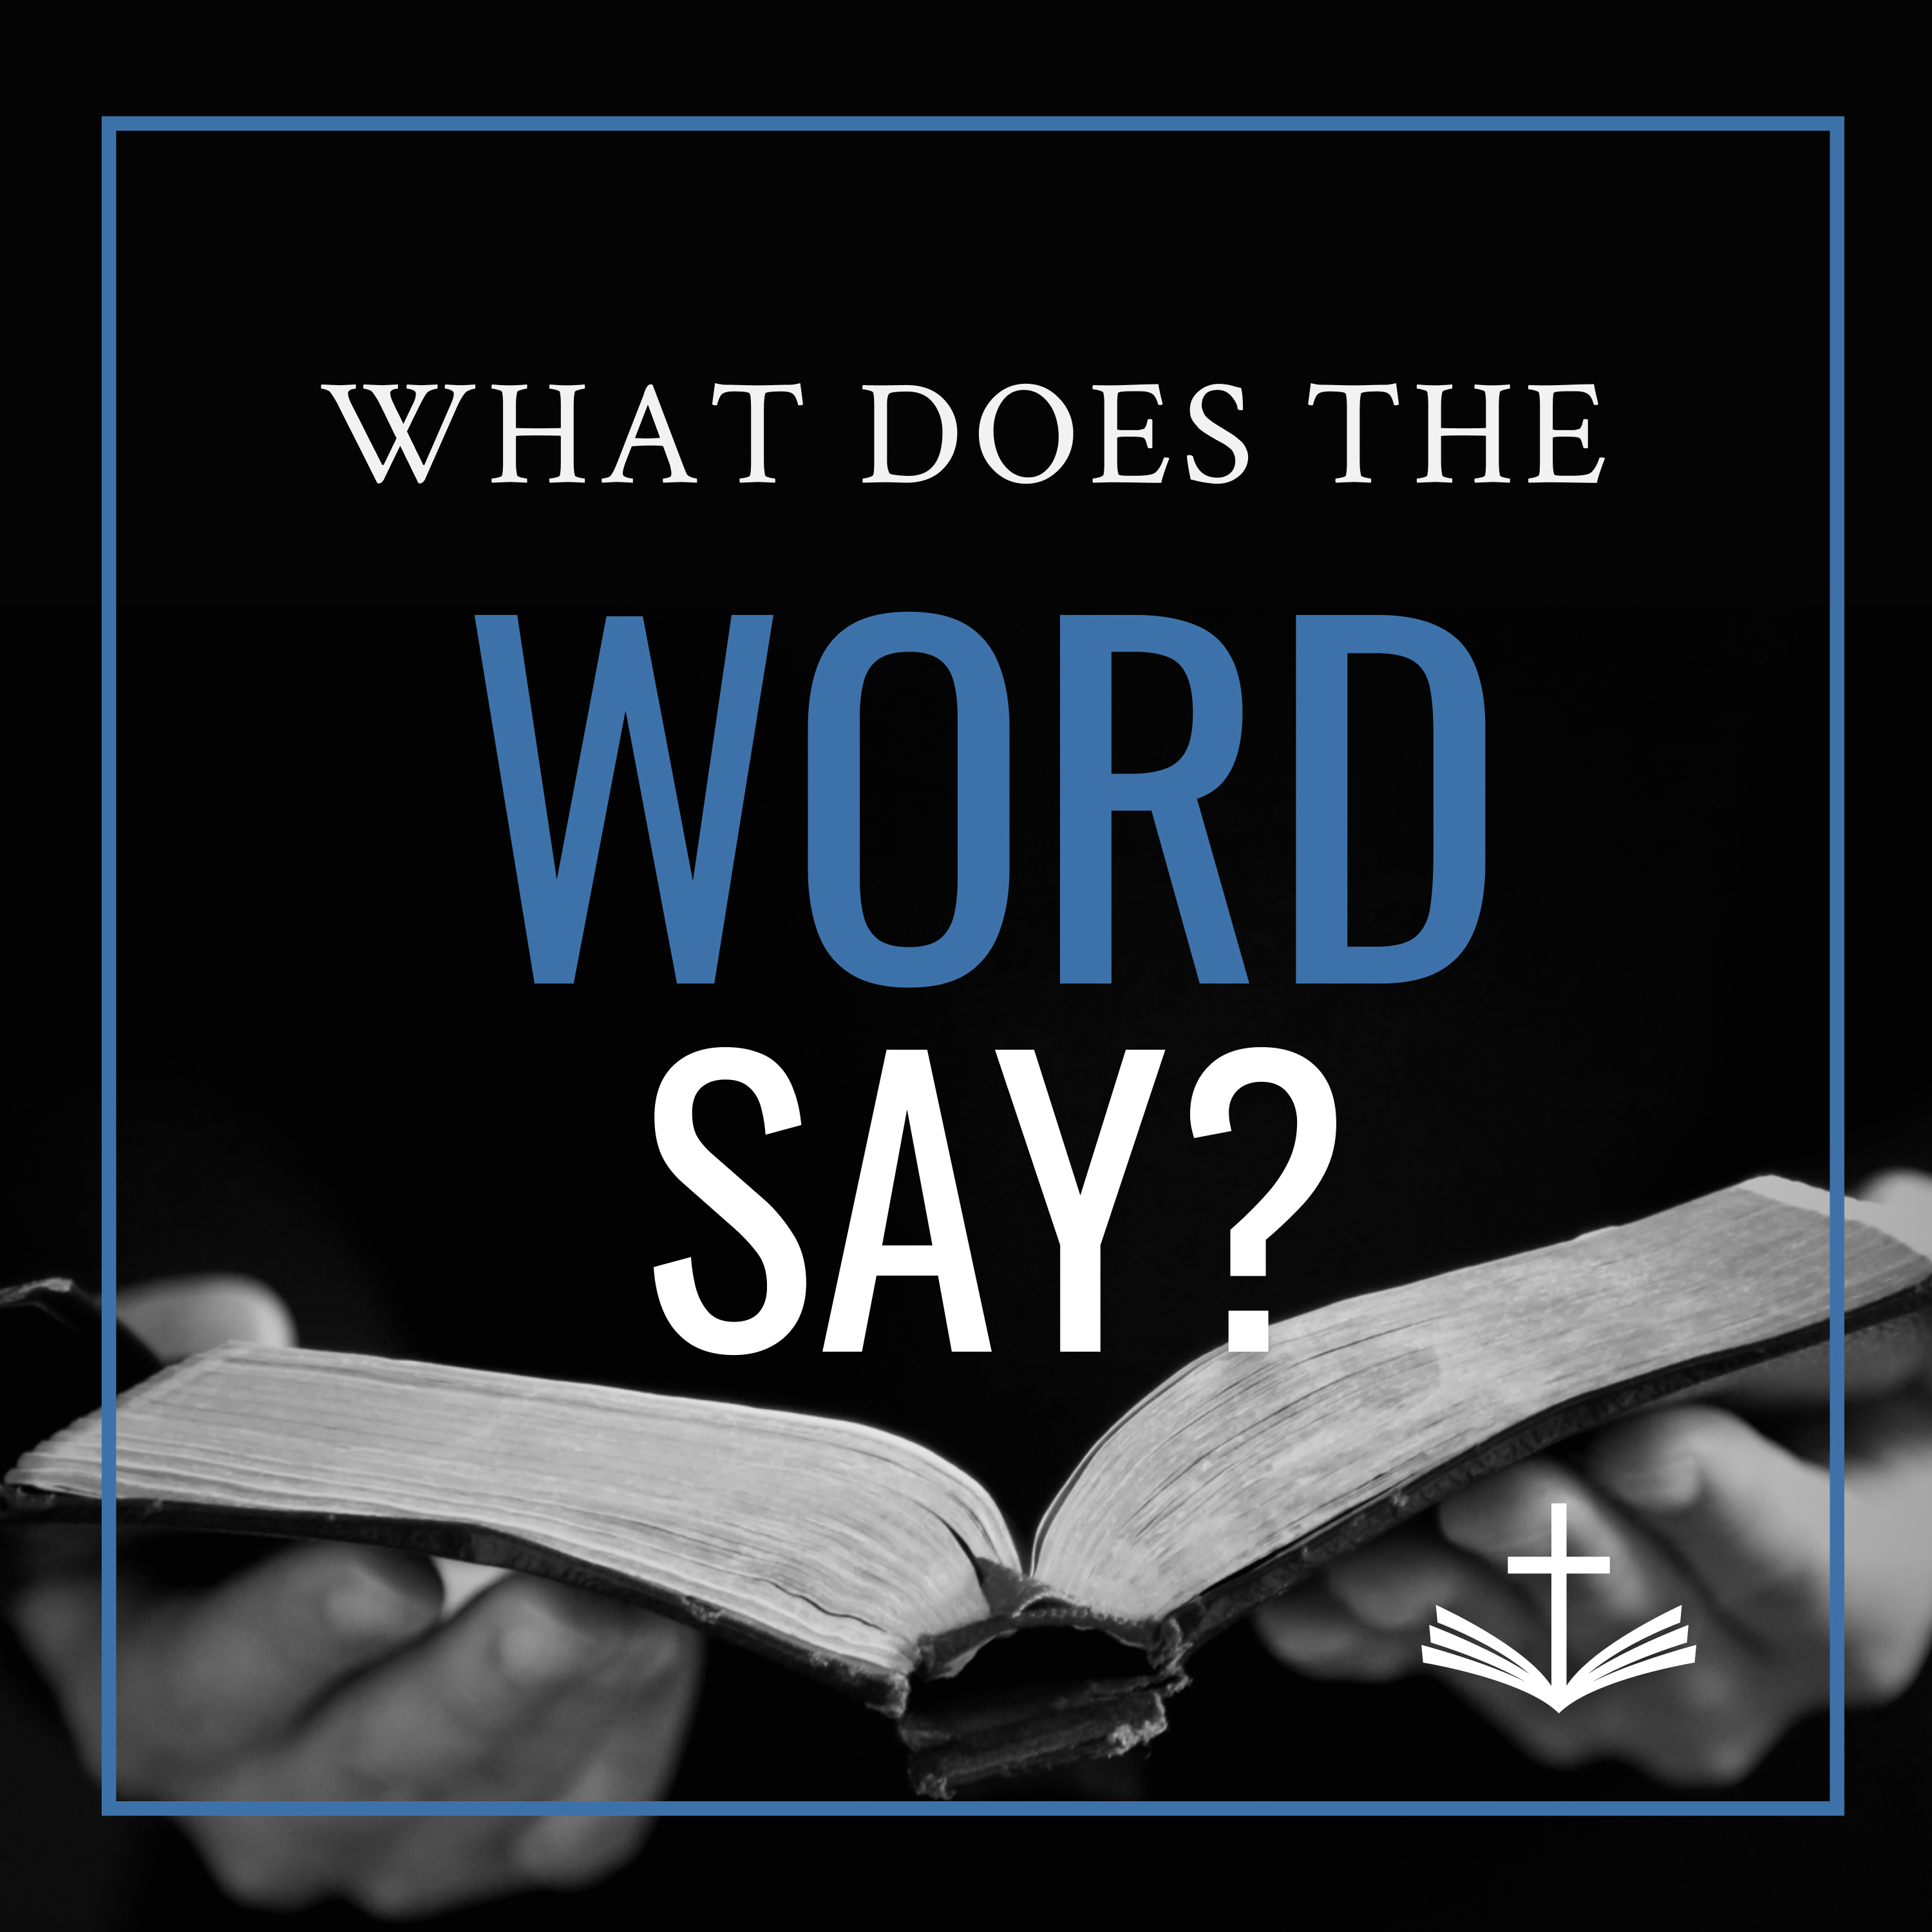 What Does the Word Say?